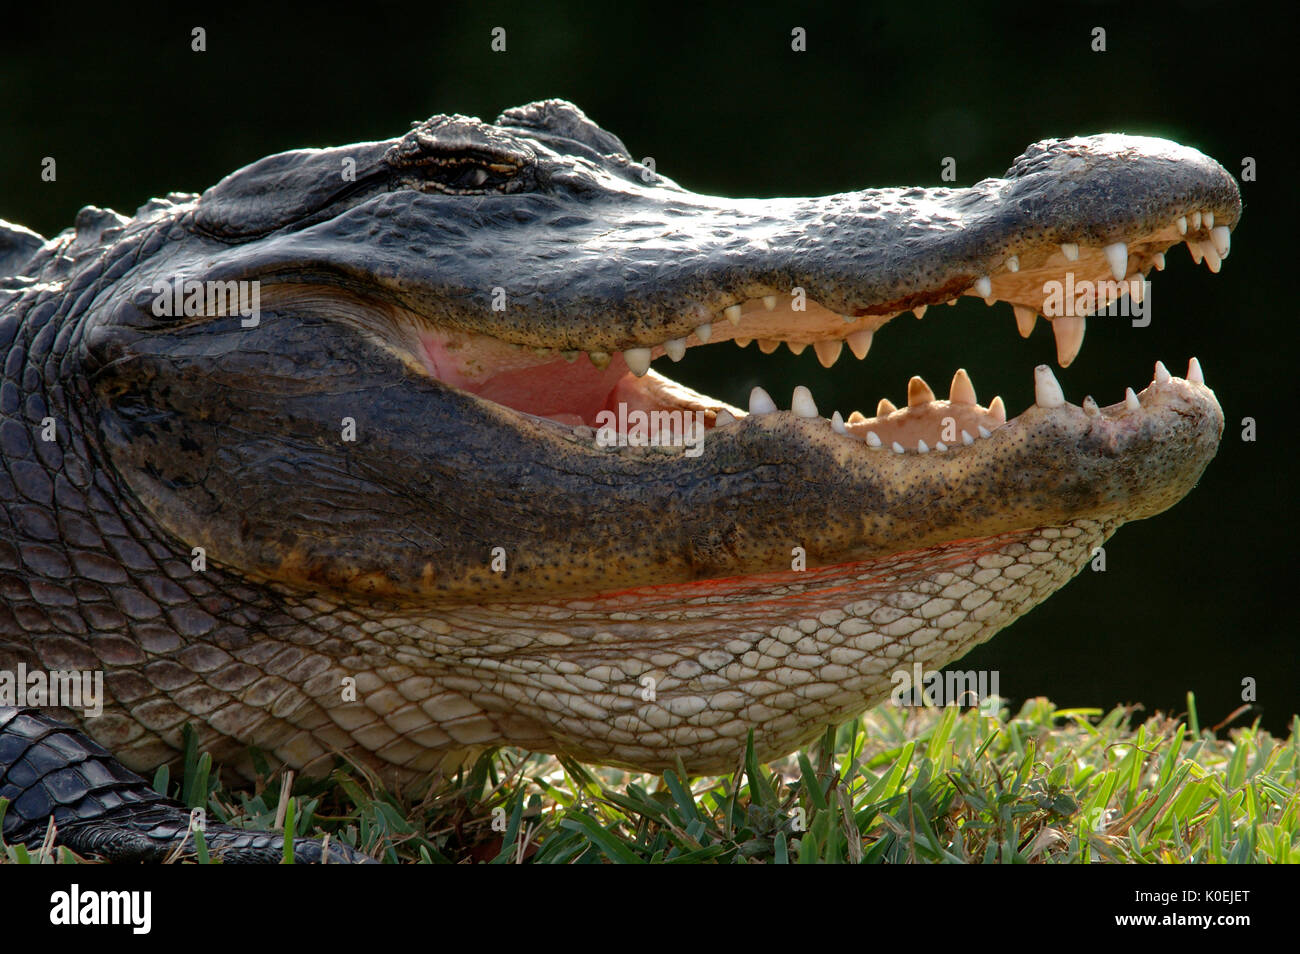 American Alligator, Alligator mississippiensis, adult resting on bank, portrait with mouth open, teeth, hissing, Everglades National Park, predator Stock Photo